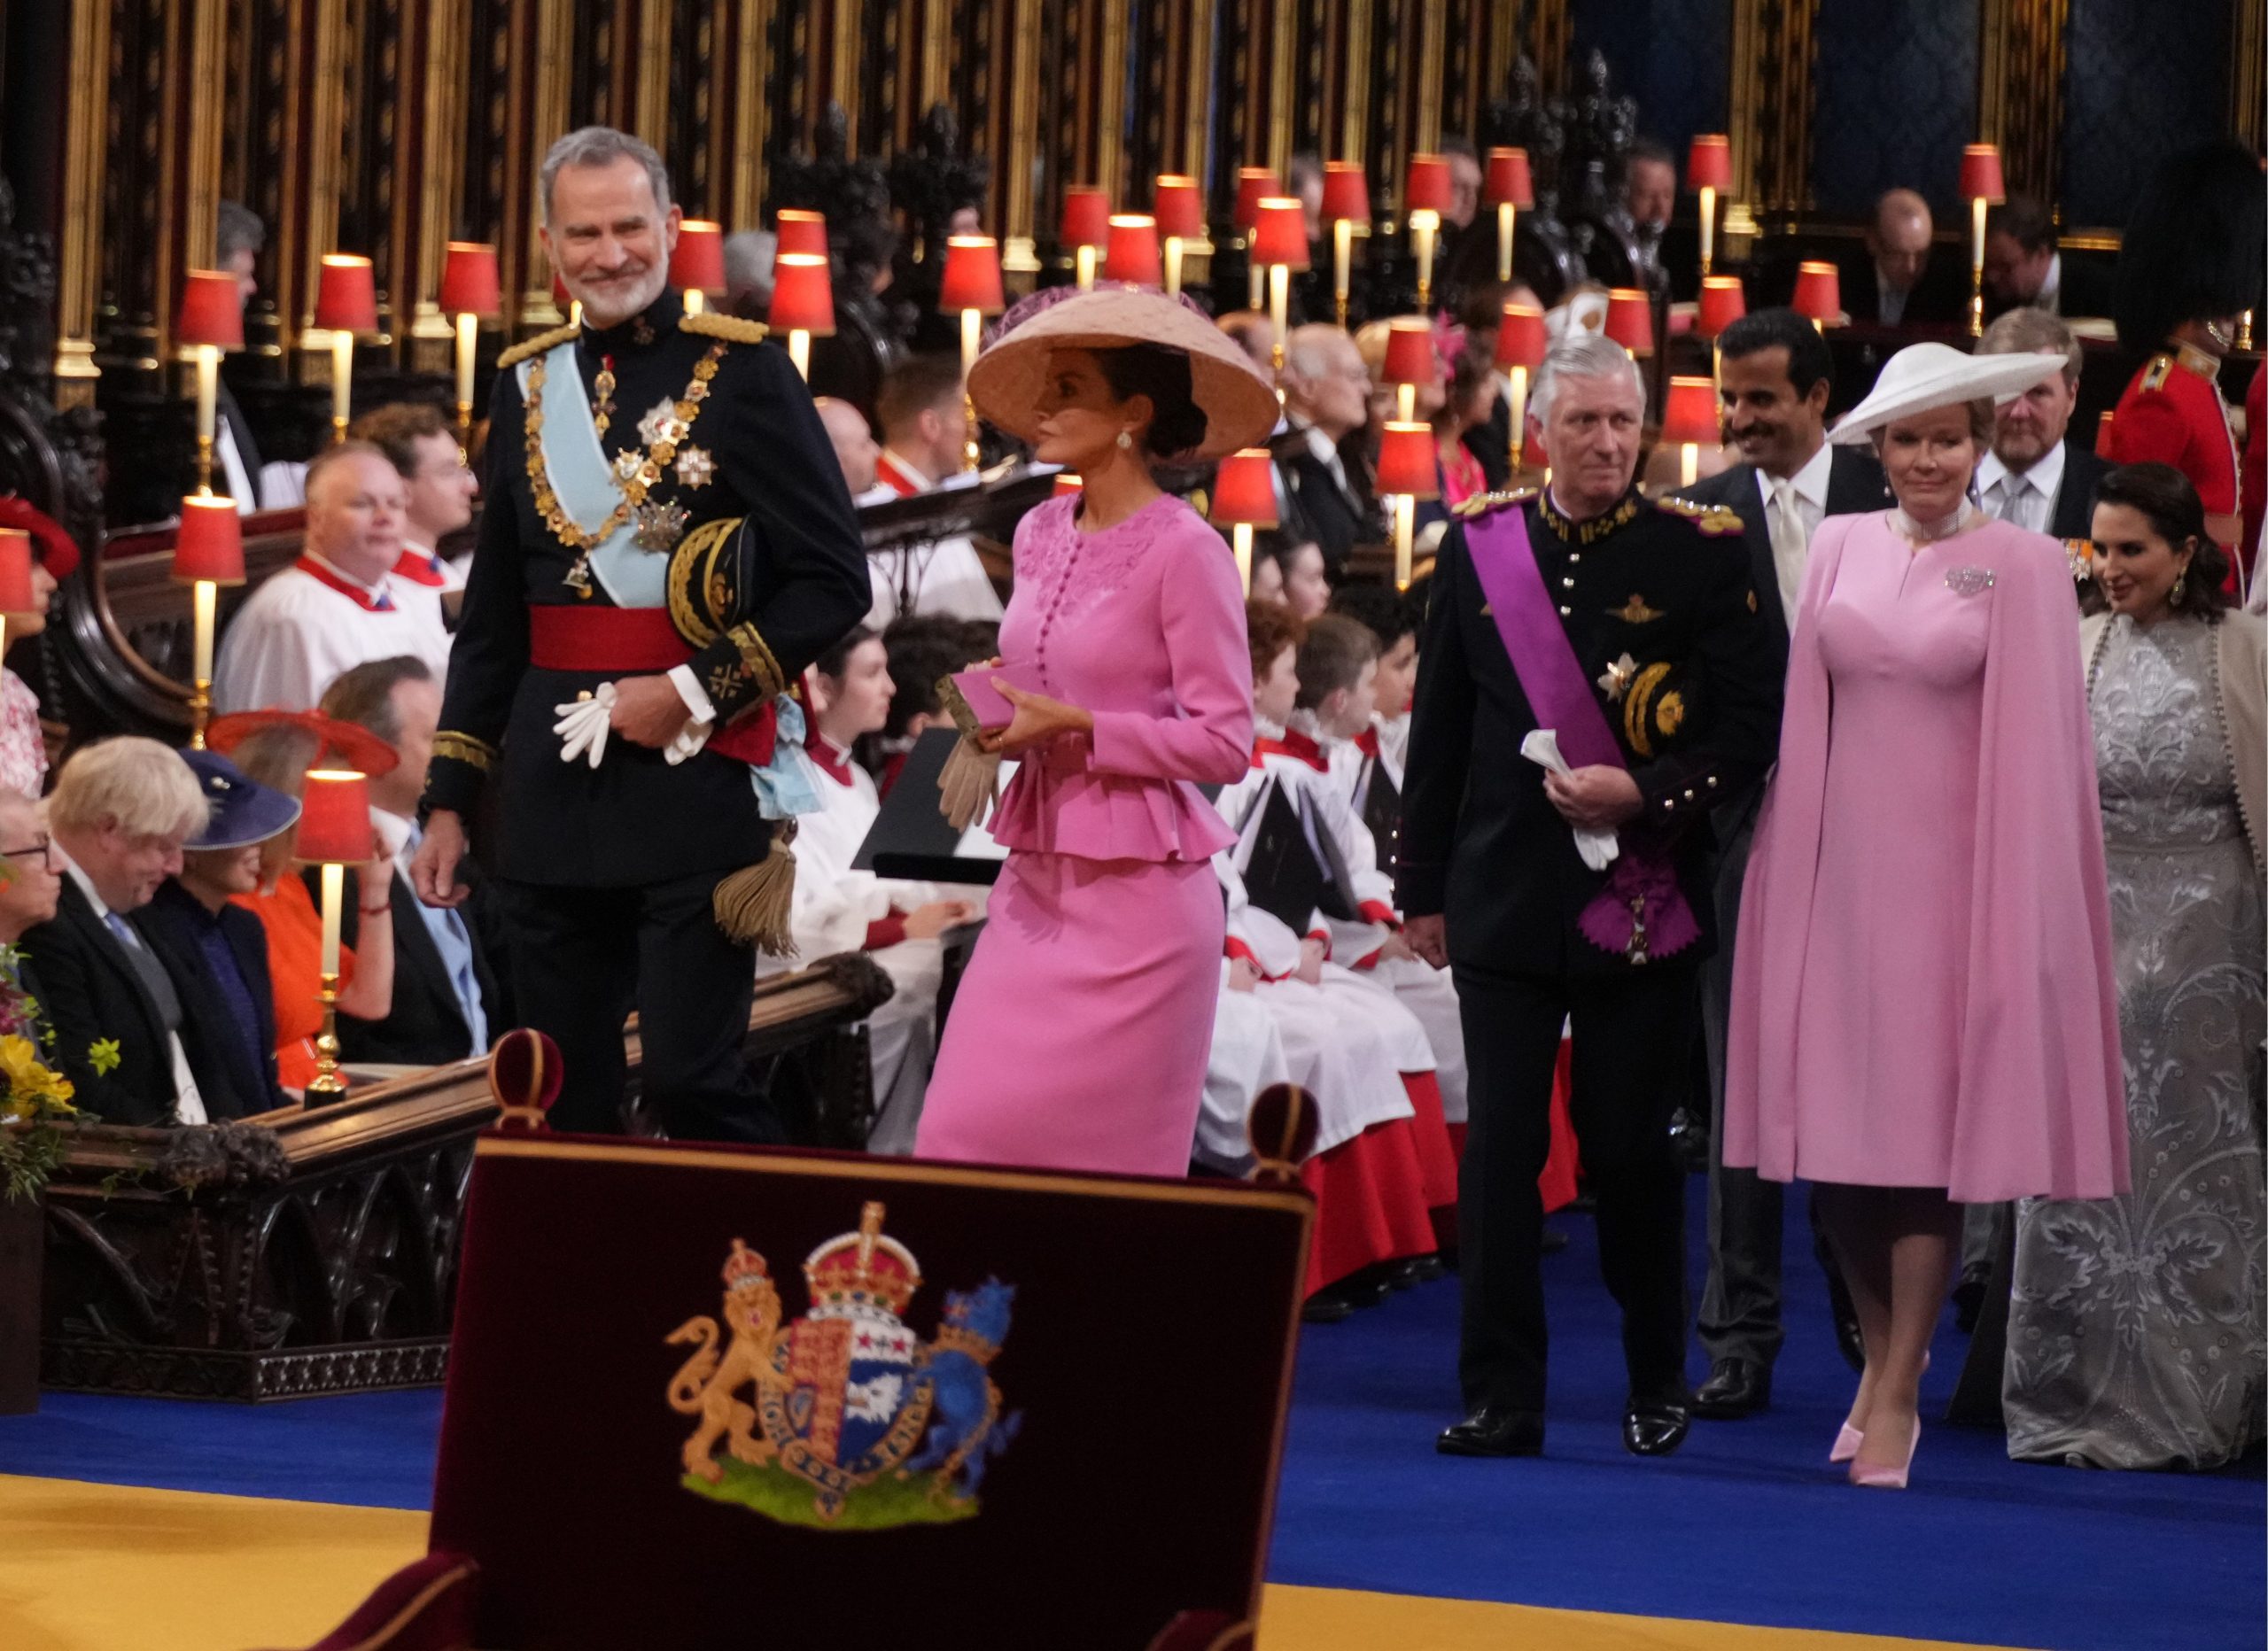 King Felipe and Queen Letizia at the coronation